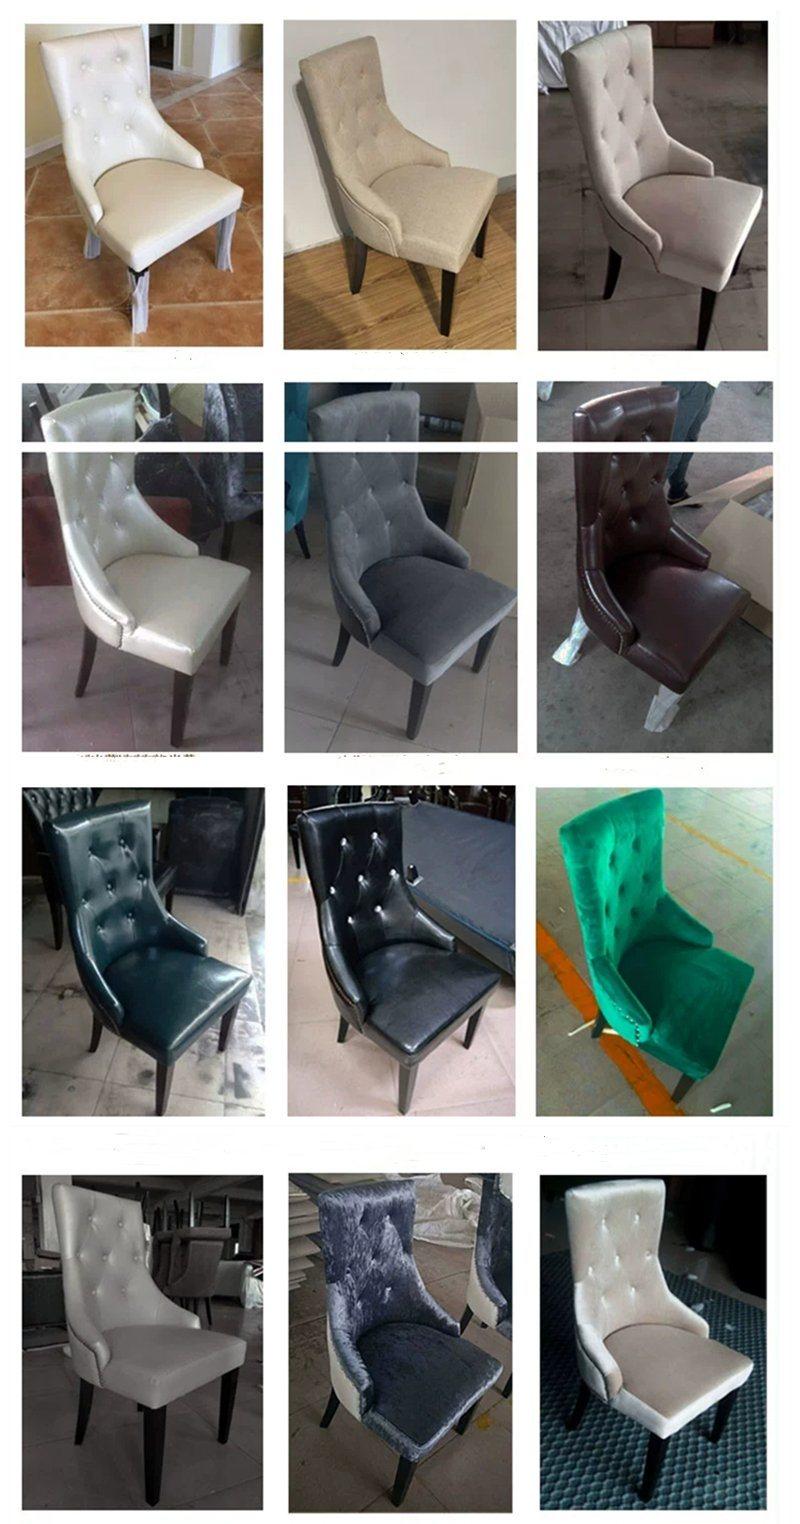 High Quality Home Leisure Furniture Chair with Low Price